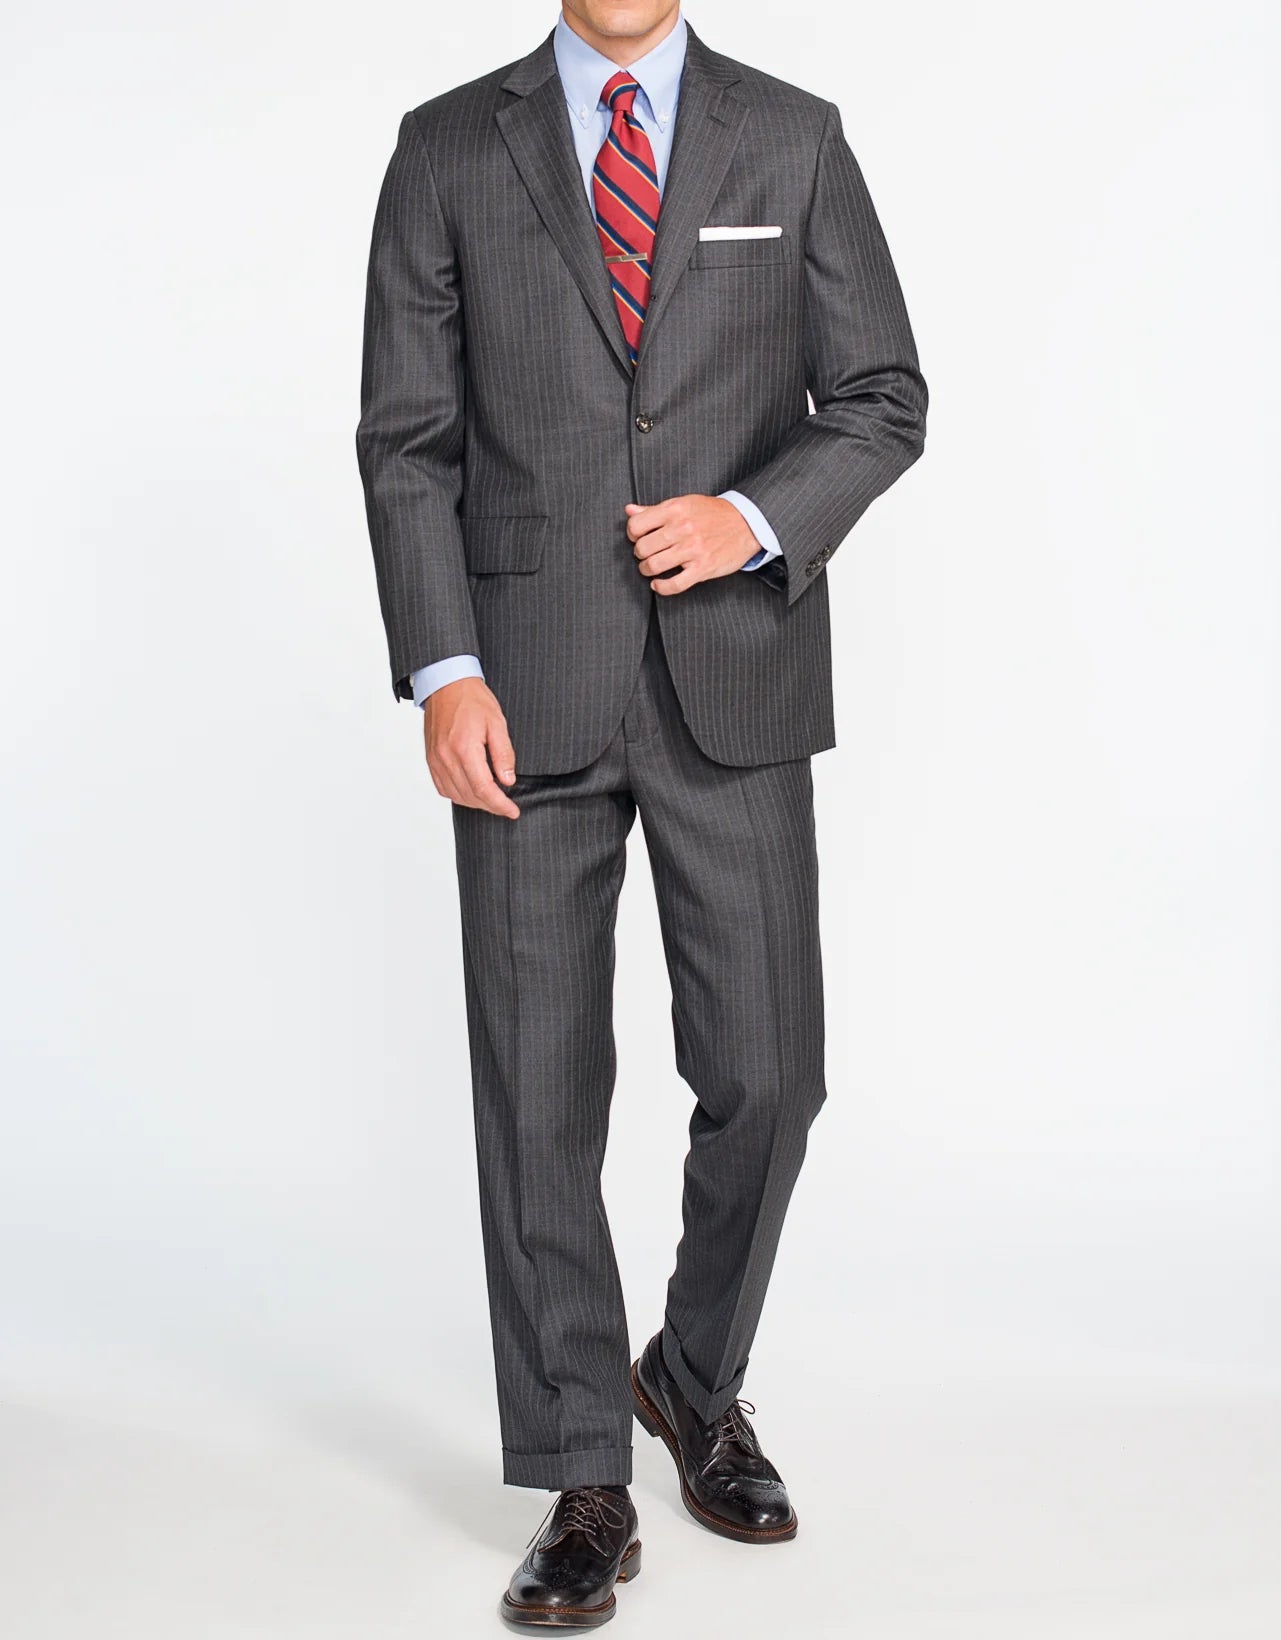 Suits - Charcoal Grey Stripe